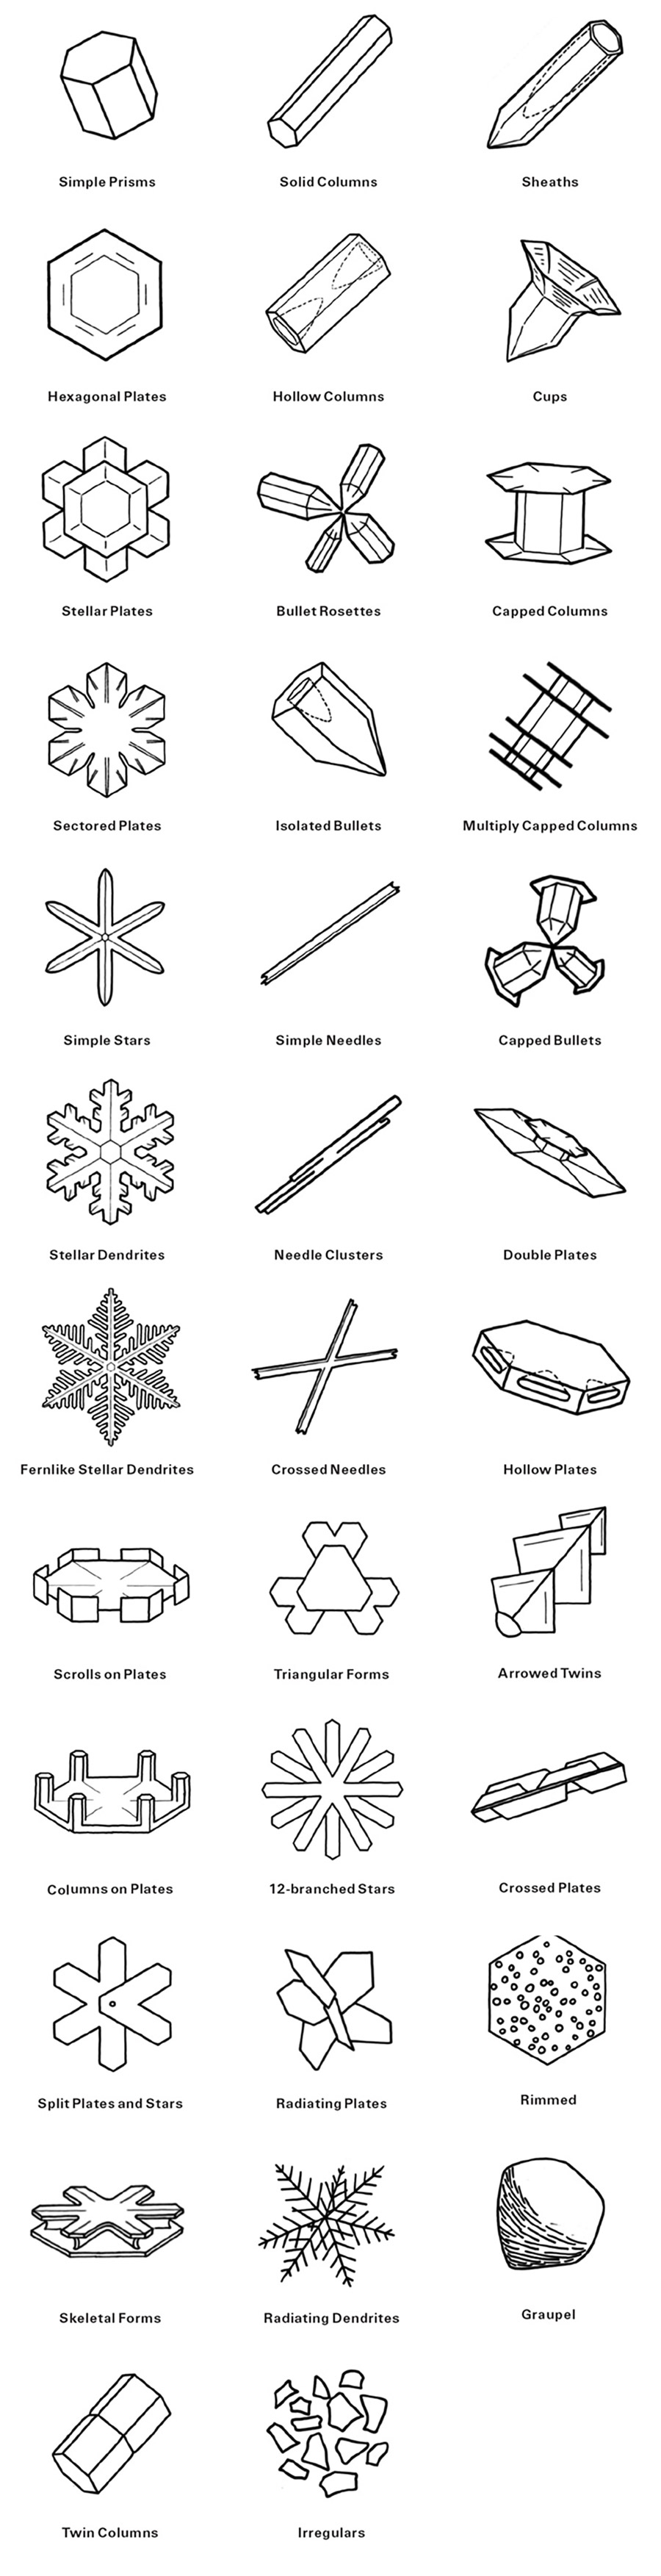 A diagram outlining Kenneth Libbrecht’s thirty five different snowflake classifications.